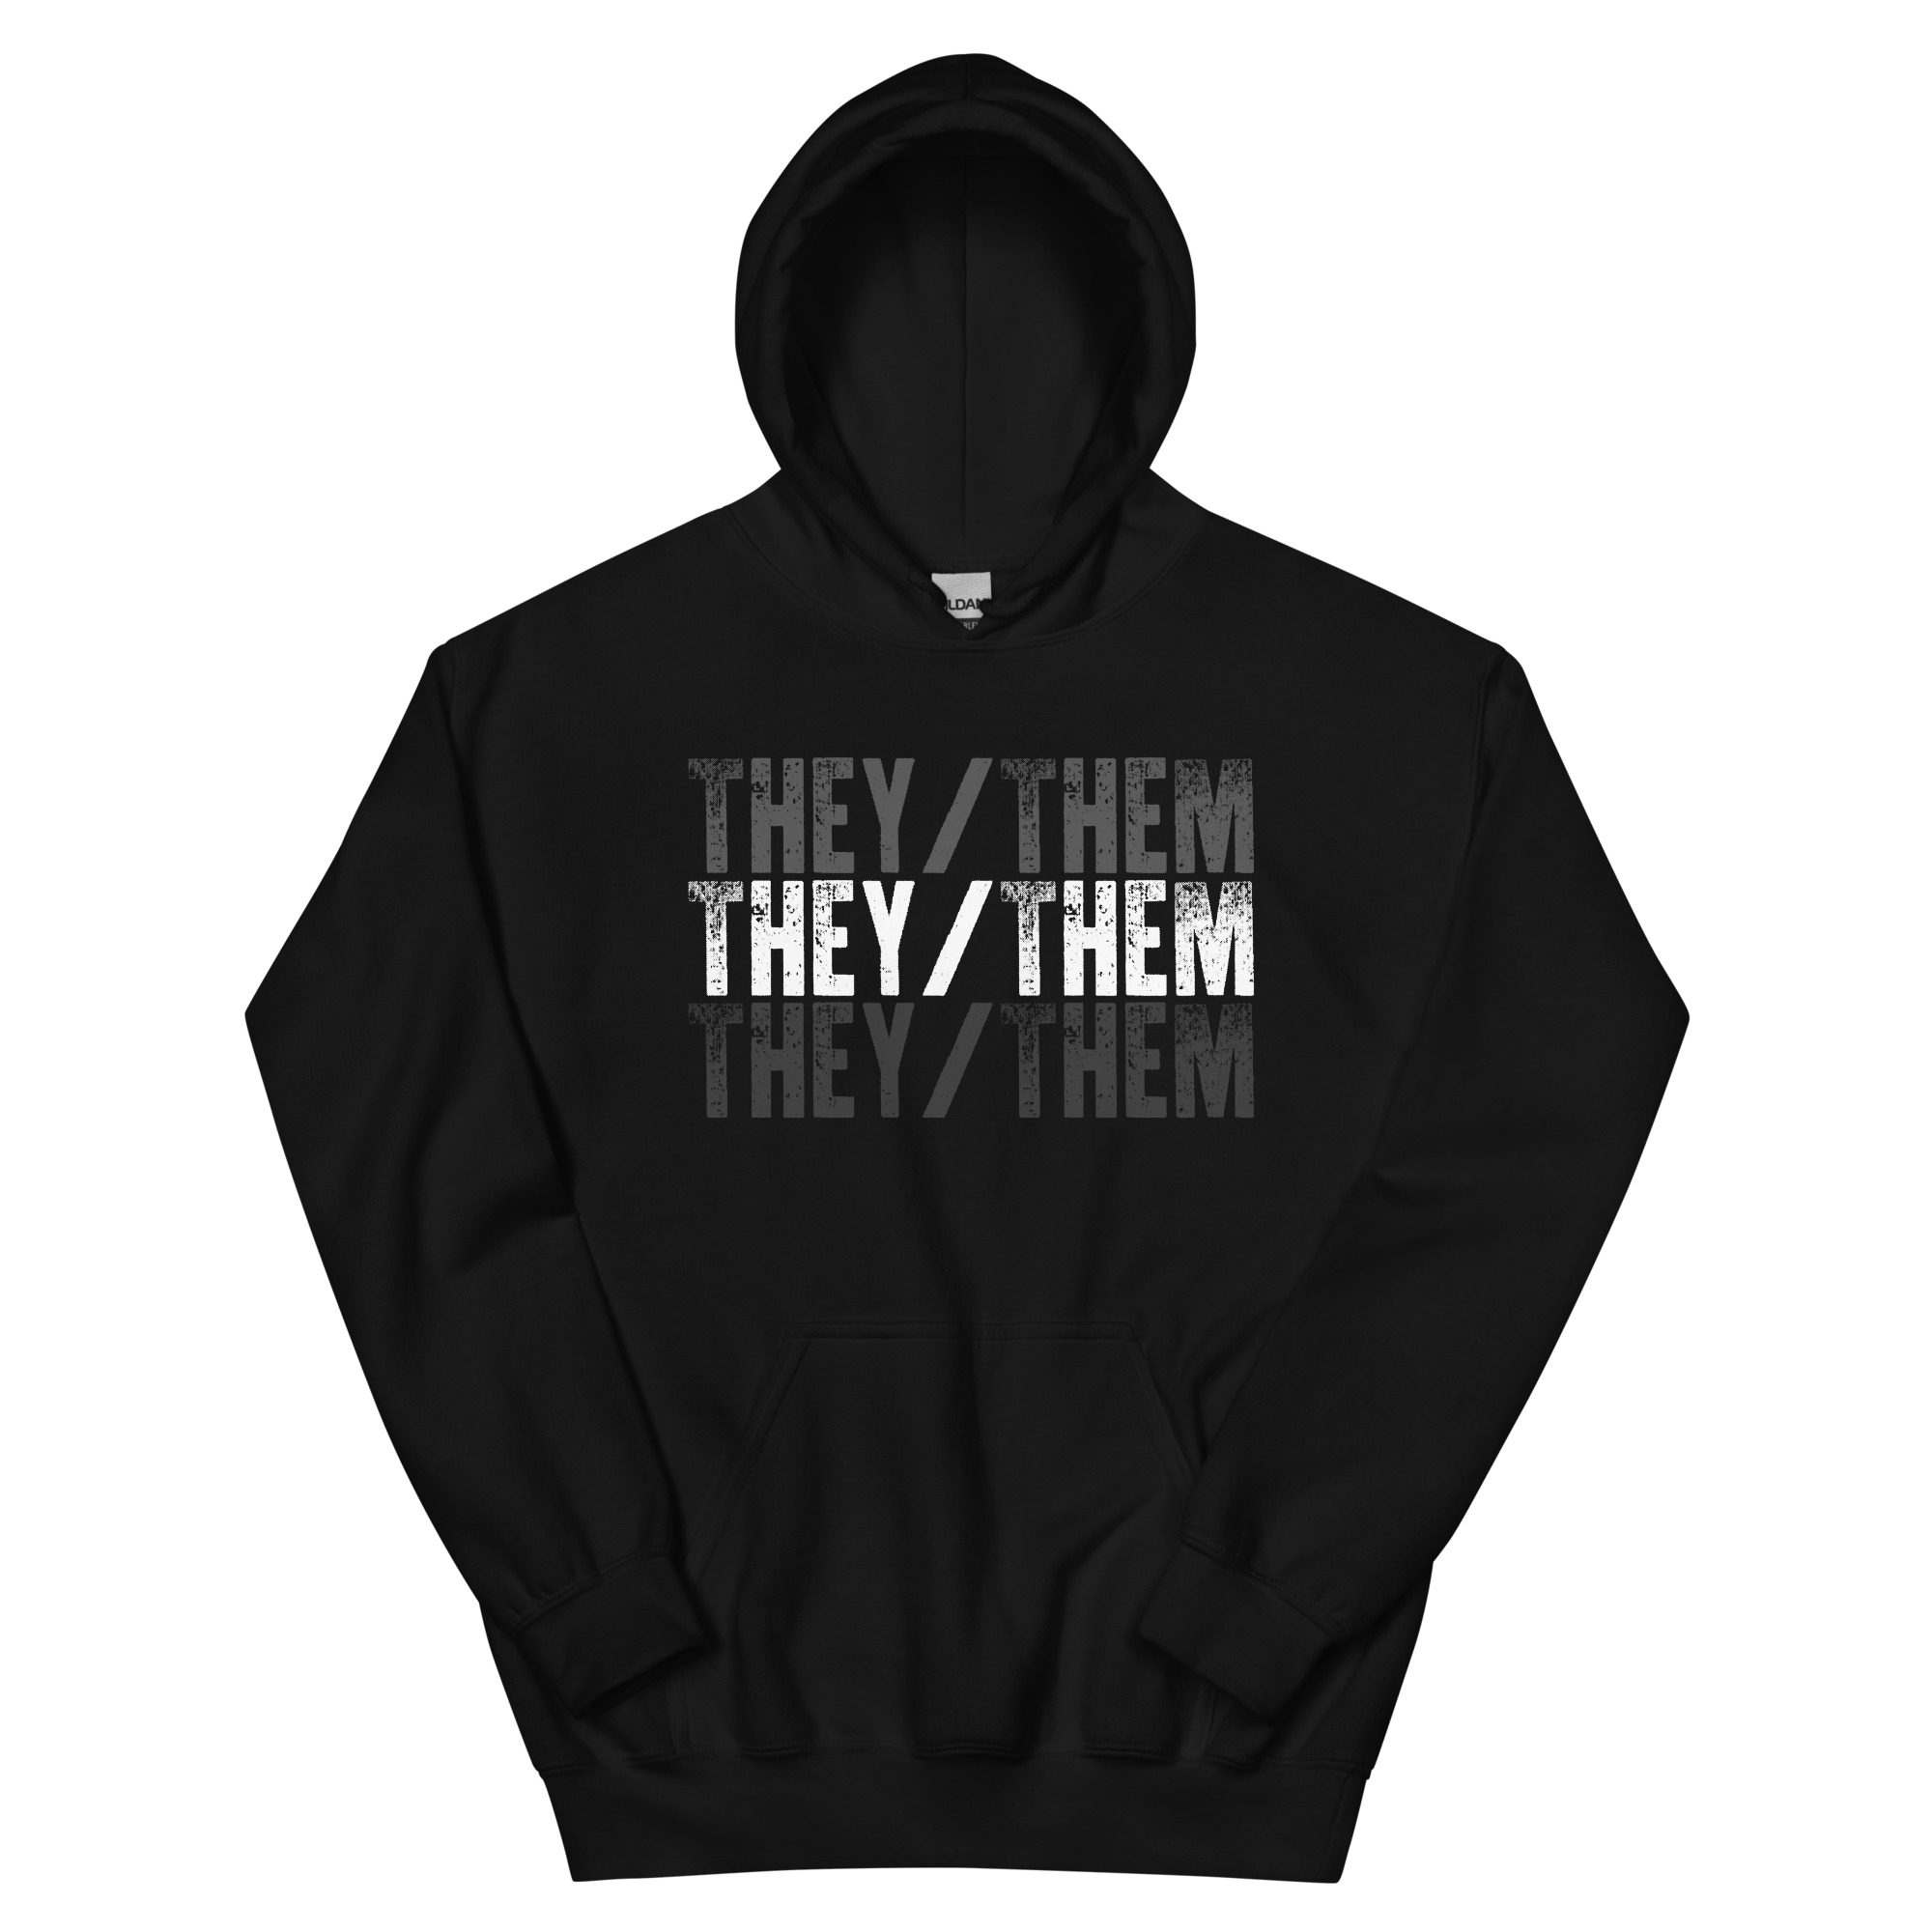 Featured image for “THEY / THEM – Unisex Gildan Hoodie”